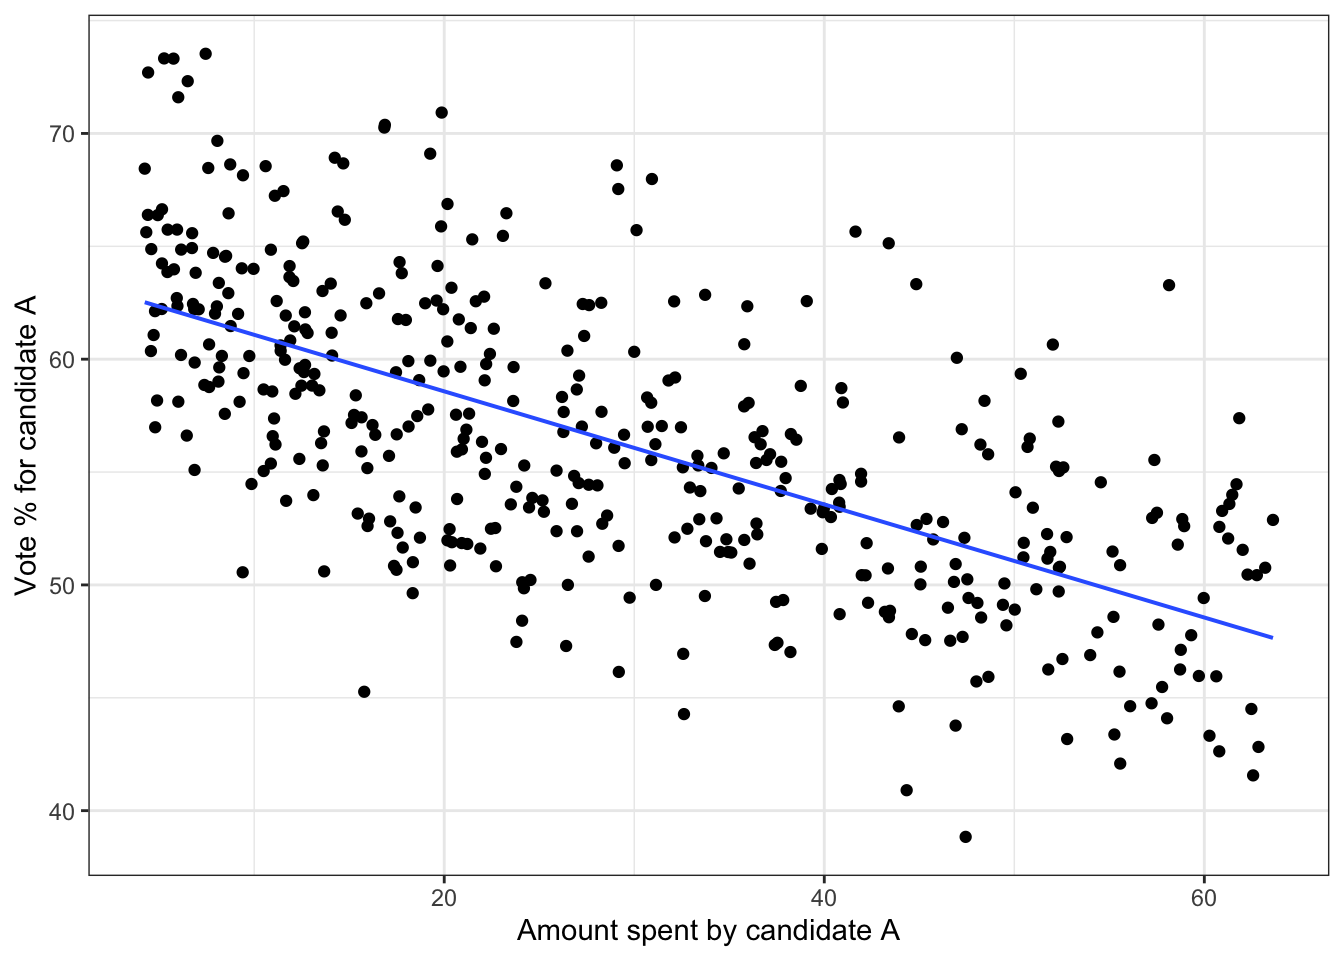 The simulation of campaign spending and election results.